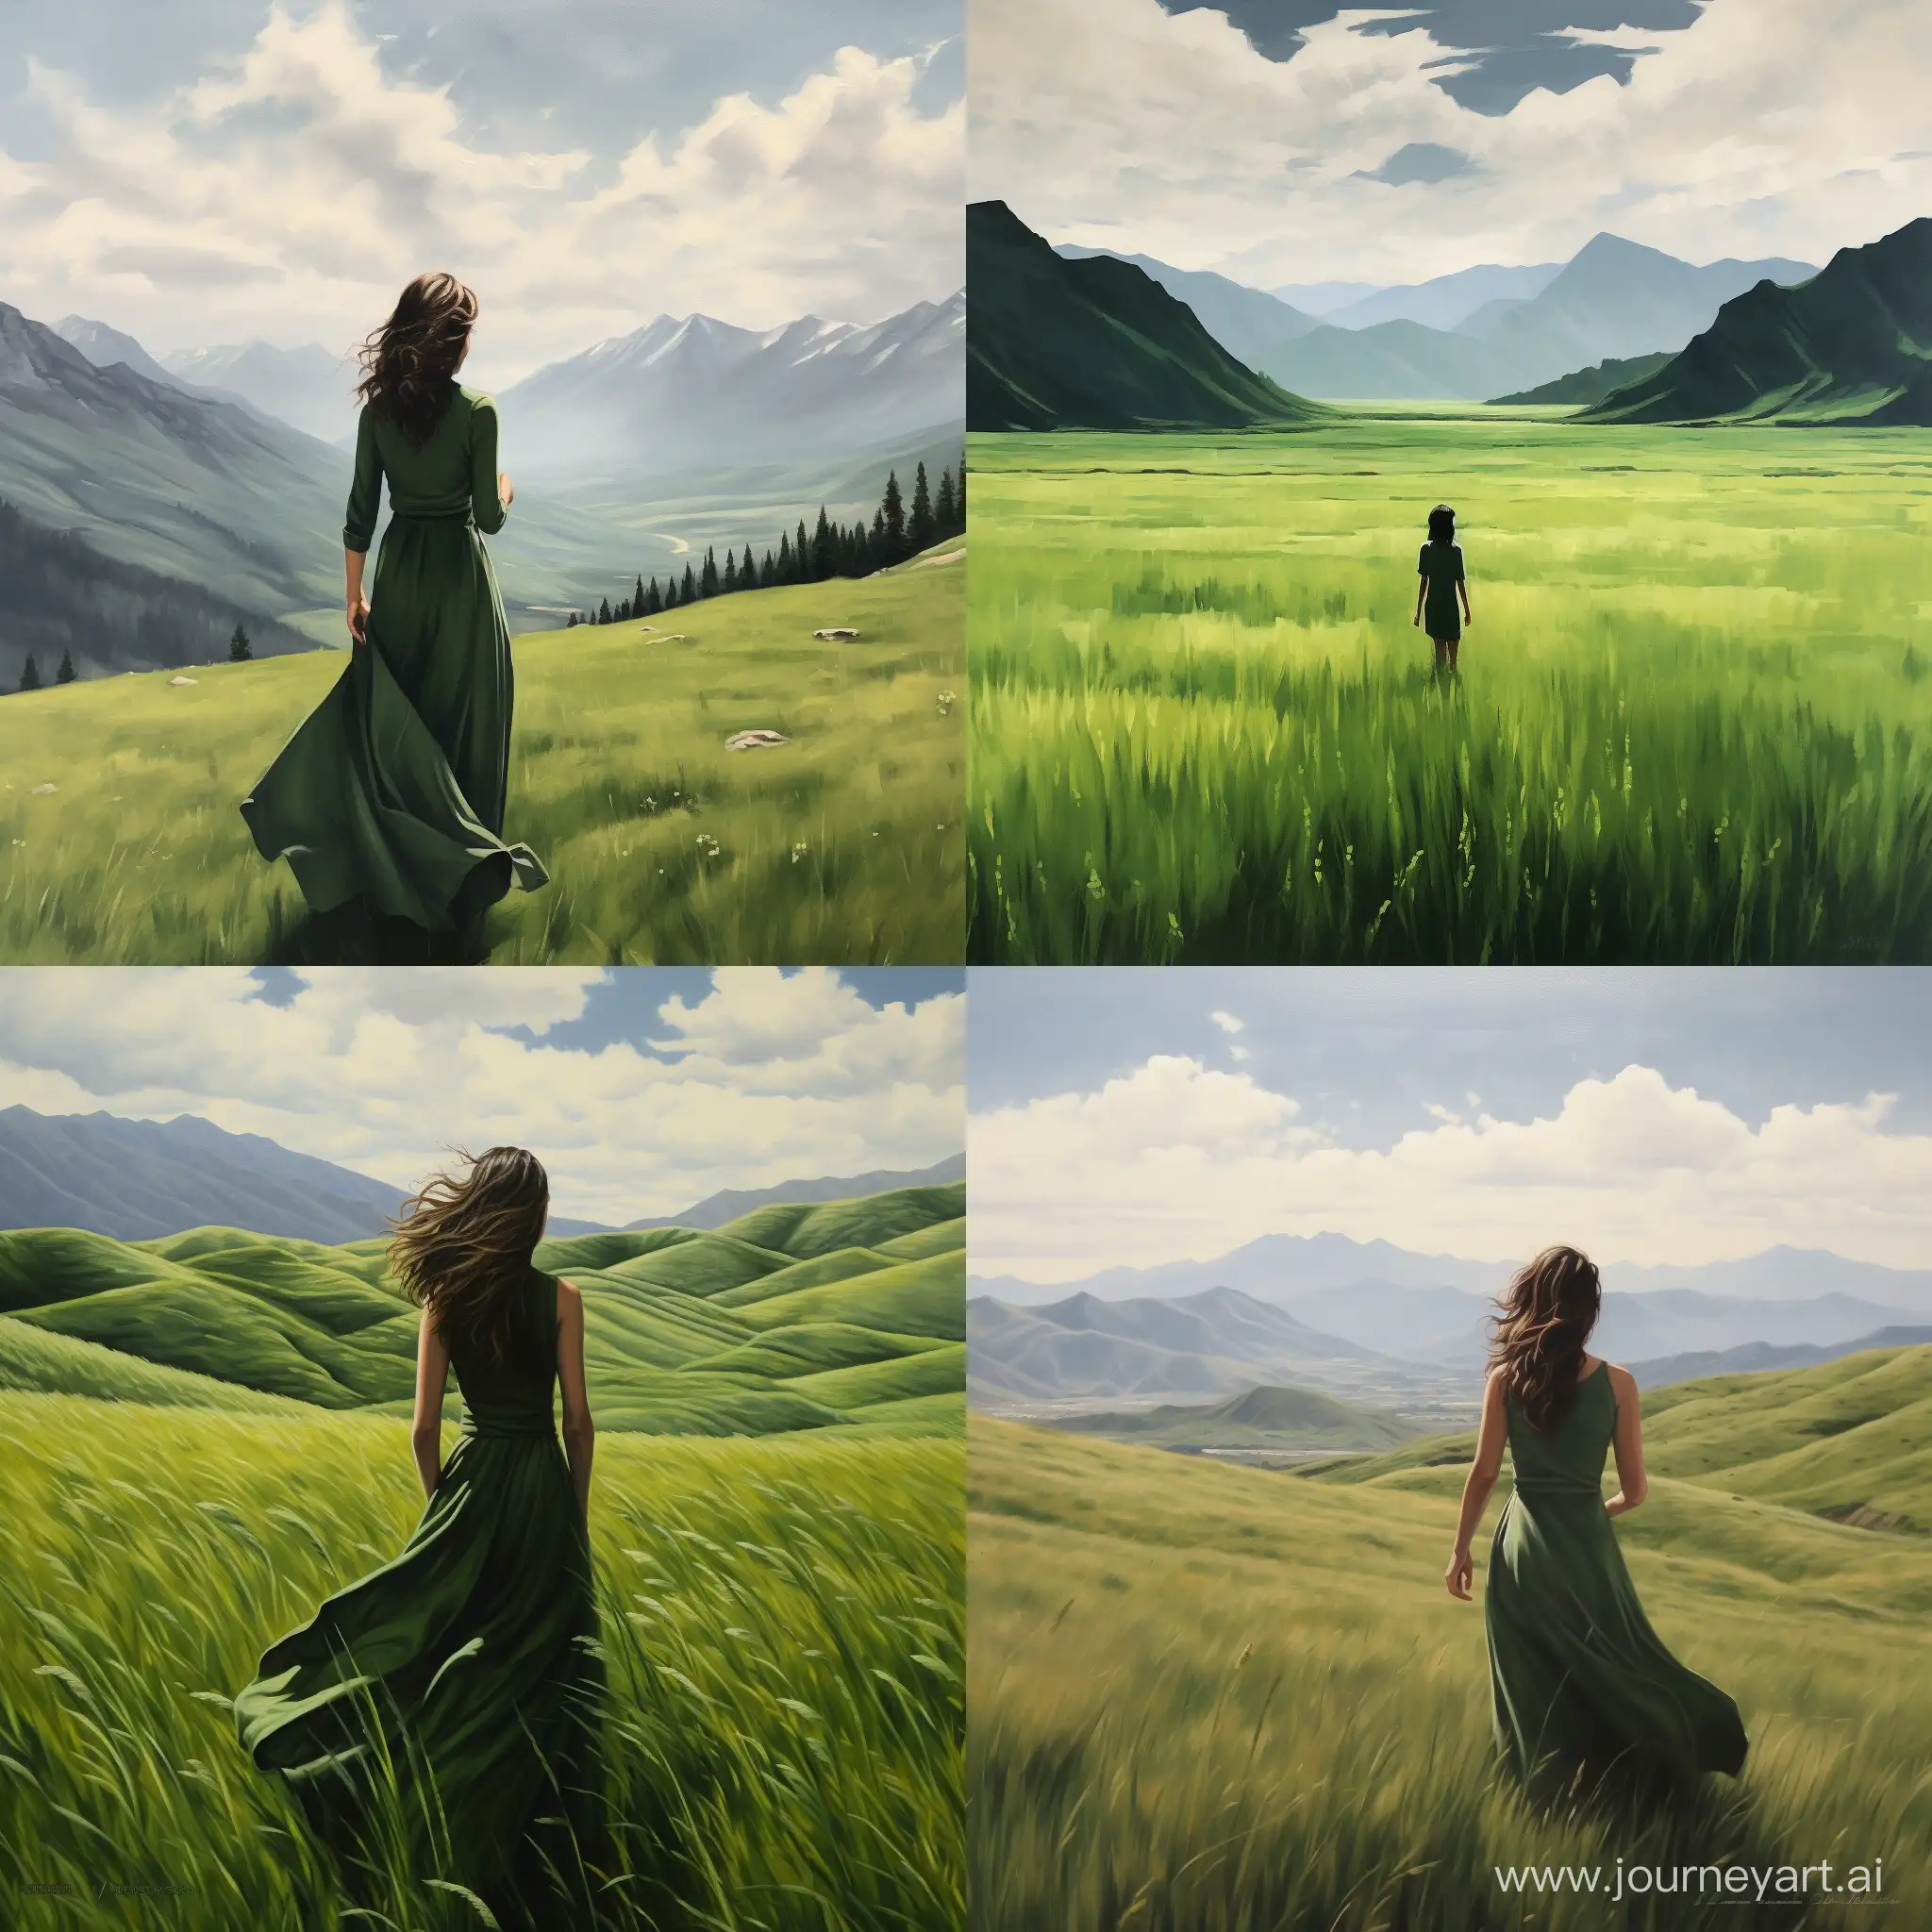 Scenic-Serenity-Standing-Amidst-Verdant-Mountains-with-Flowing-Grass-in-the-Wind